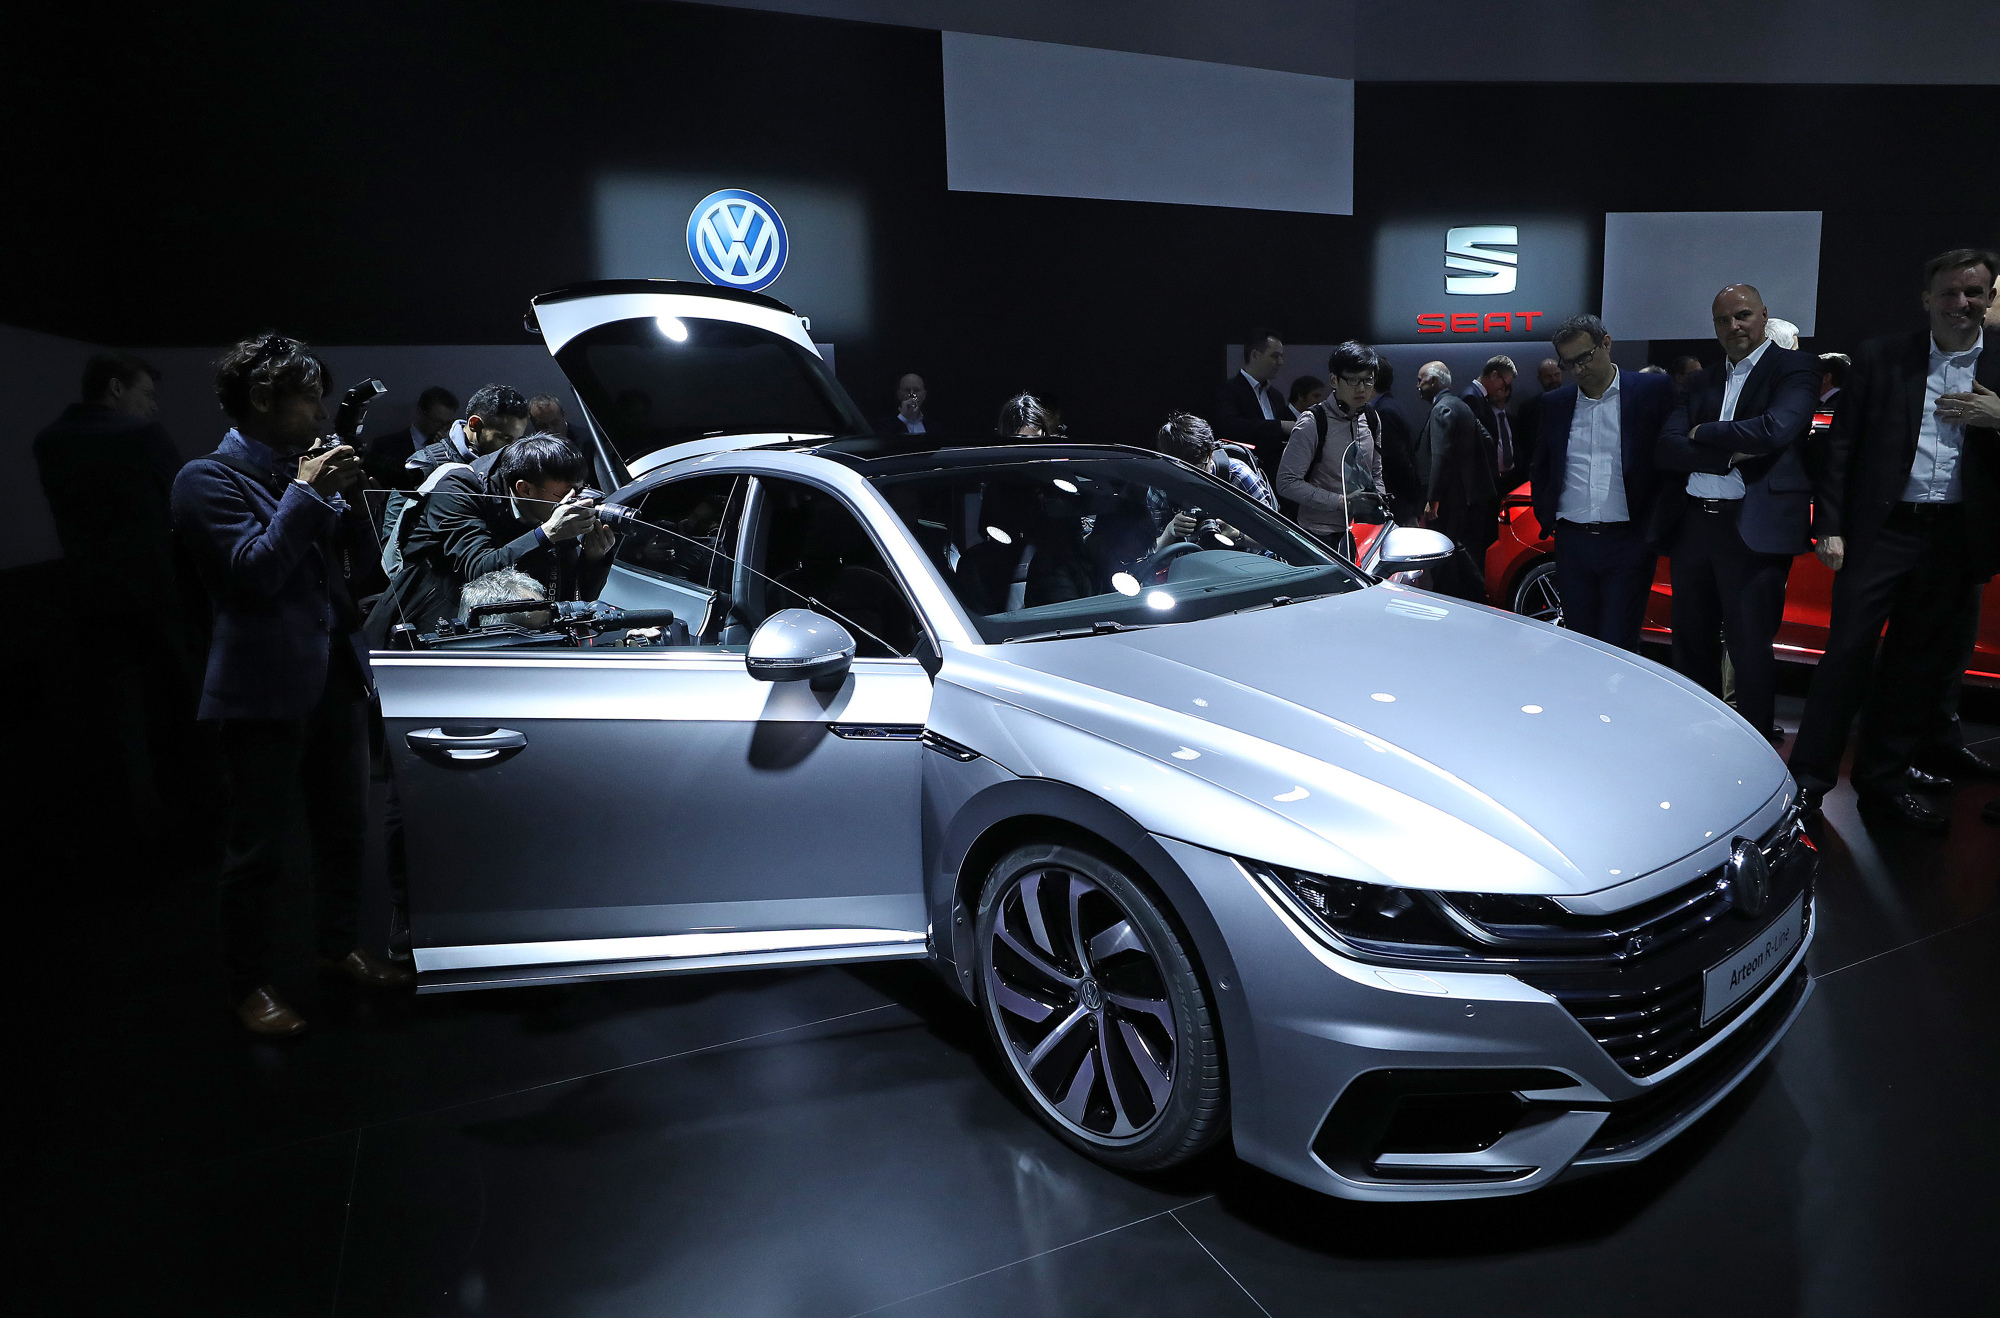 VW Unveils Arteon as Flagship Car in Effort to Shift From Crisis - Bloomberg